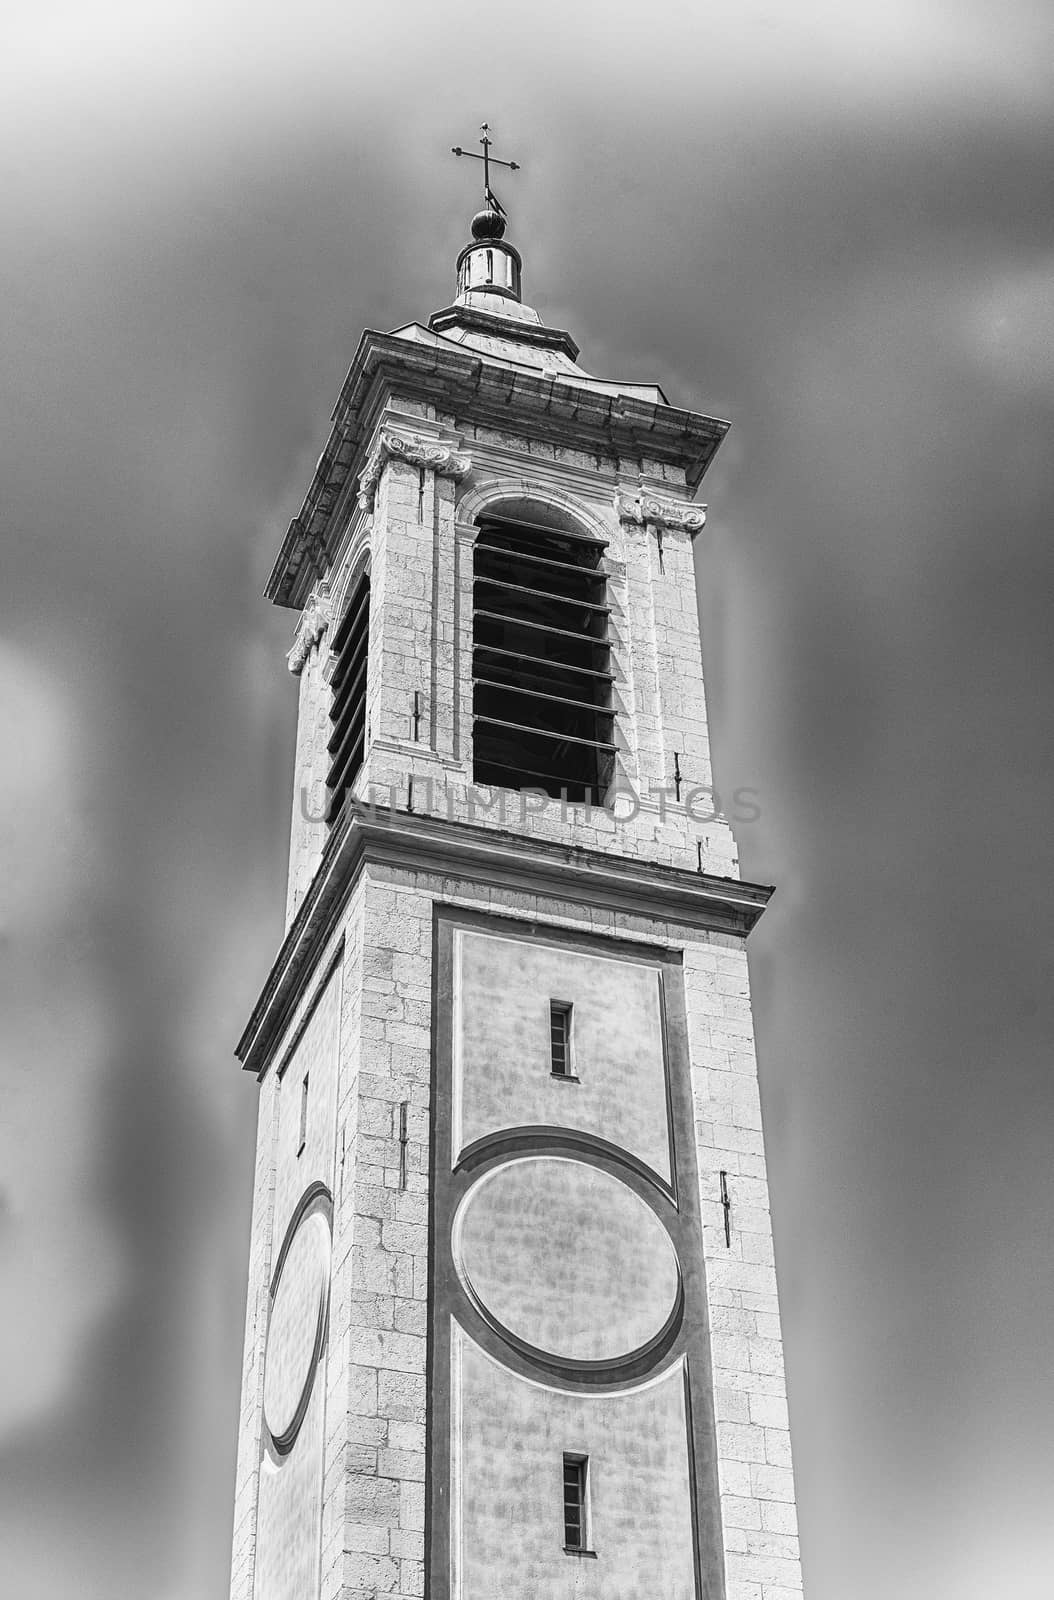 Belltower of the baroque Cathedral of Saint Reparata, in the old town of Nice, Cote d'Azur, France